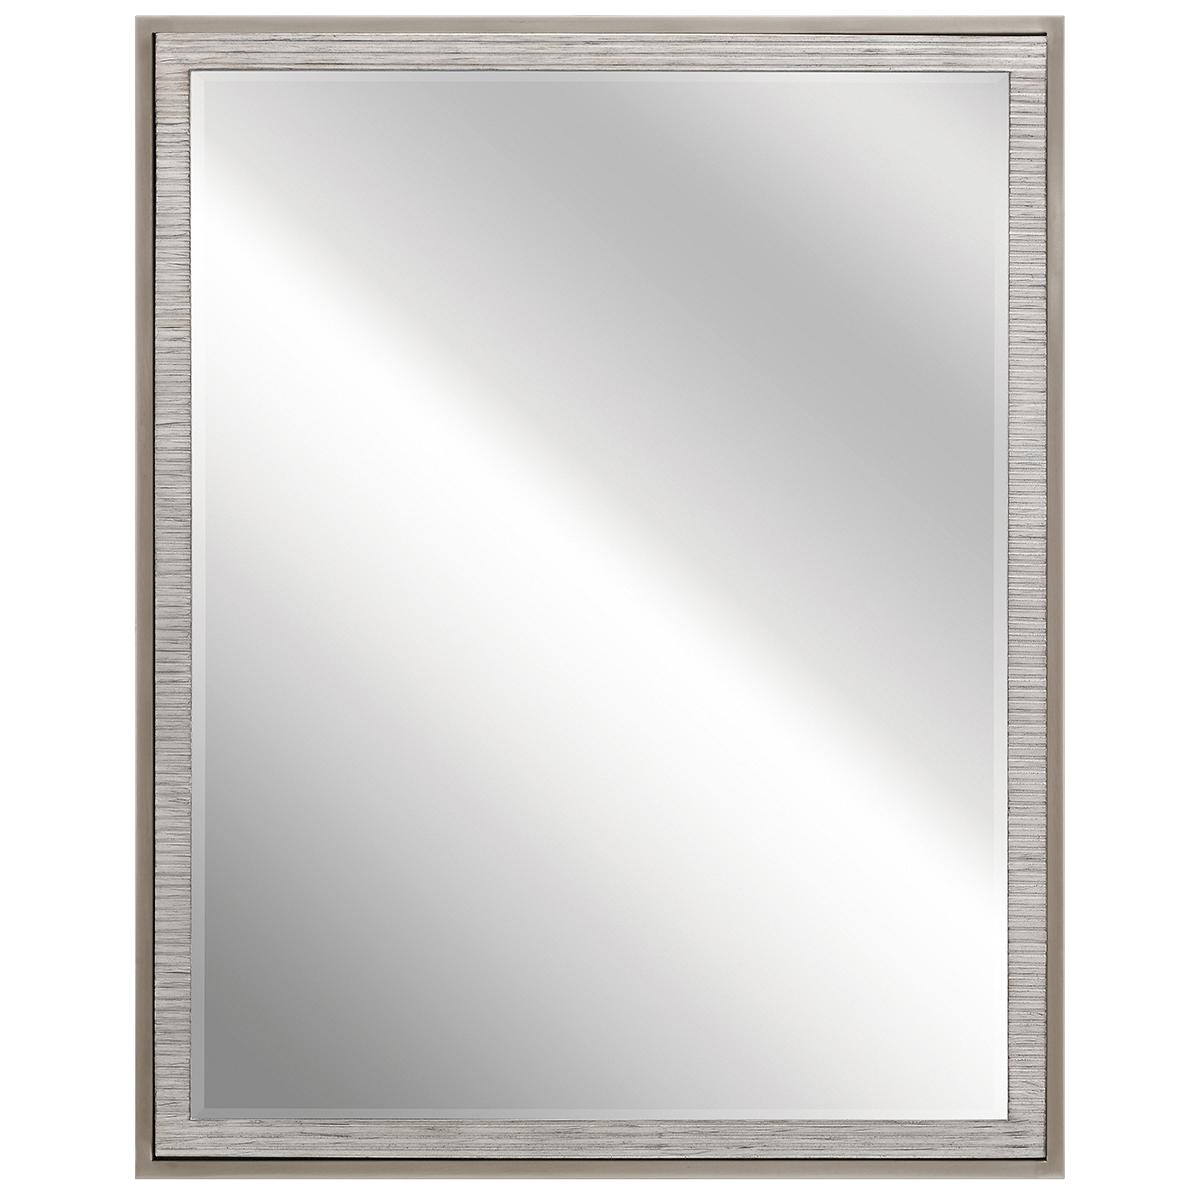 This 24in. x 30in. mirror from the Millwright(TM) collection features a Rubbed Gray finish and seamlessly pairs with the Millwright(TM) bath collection.